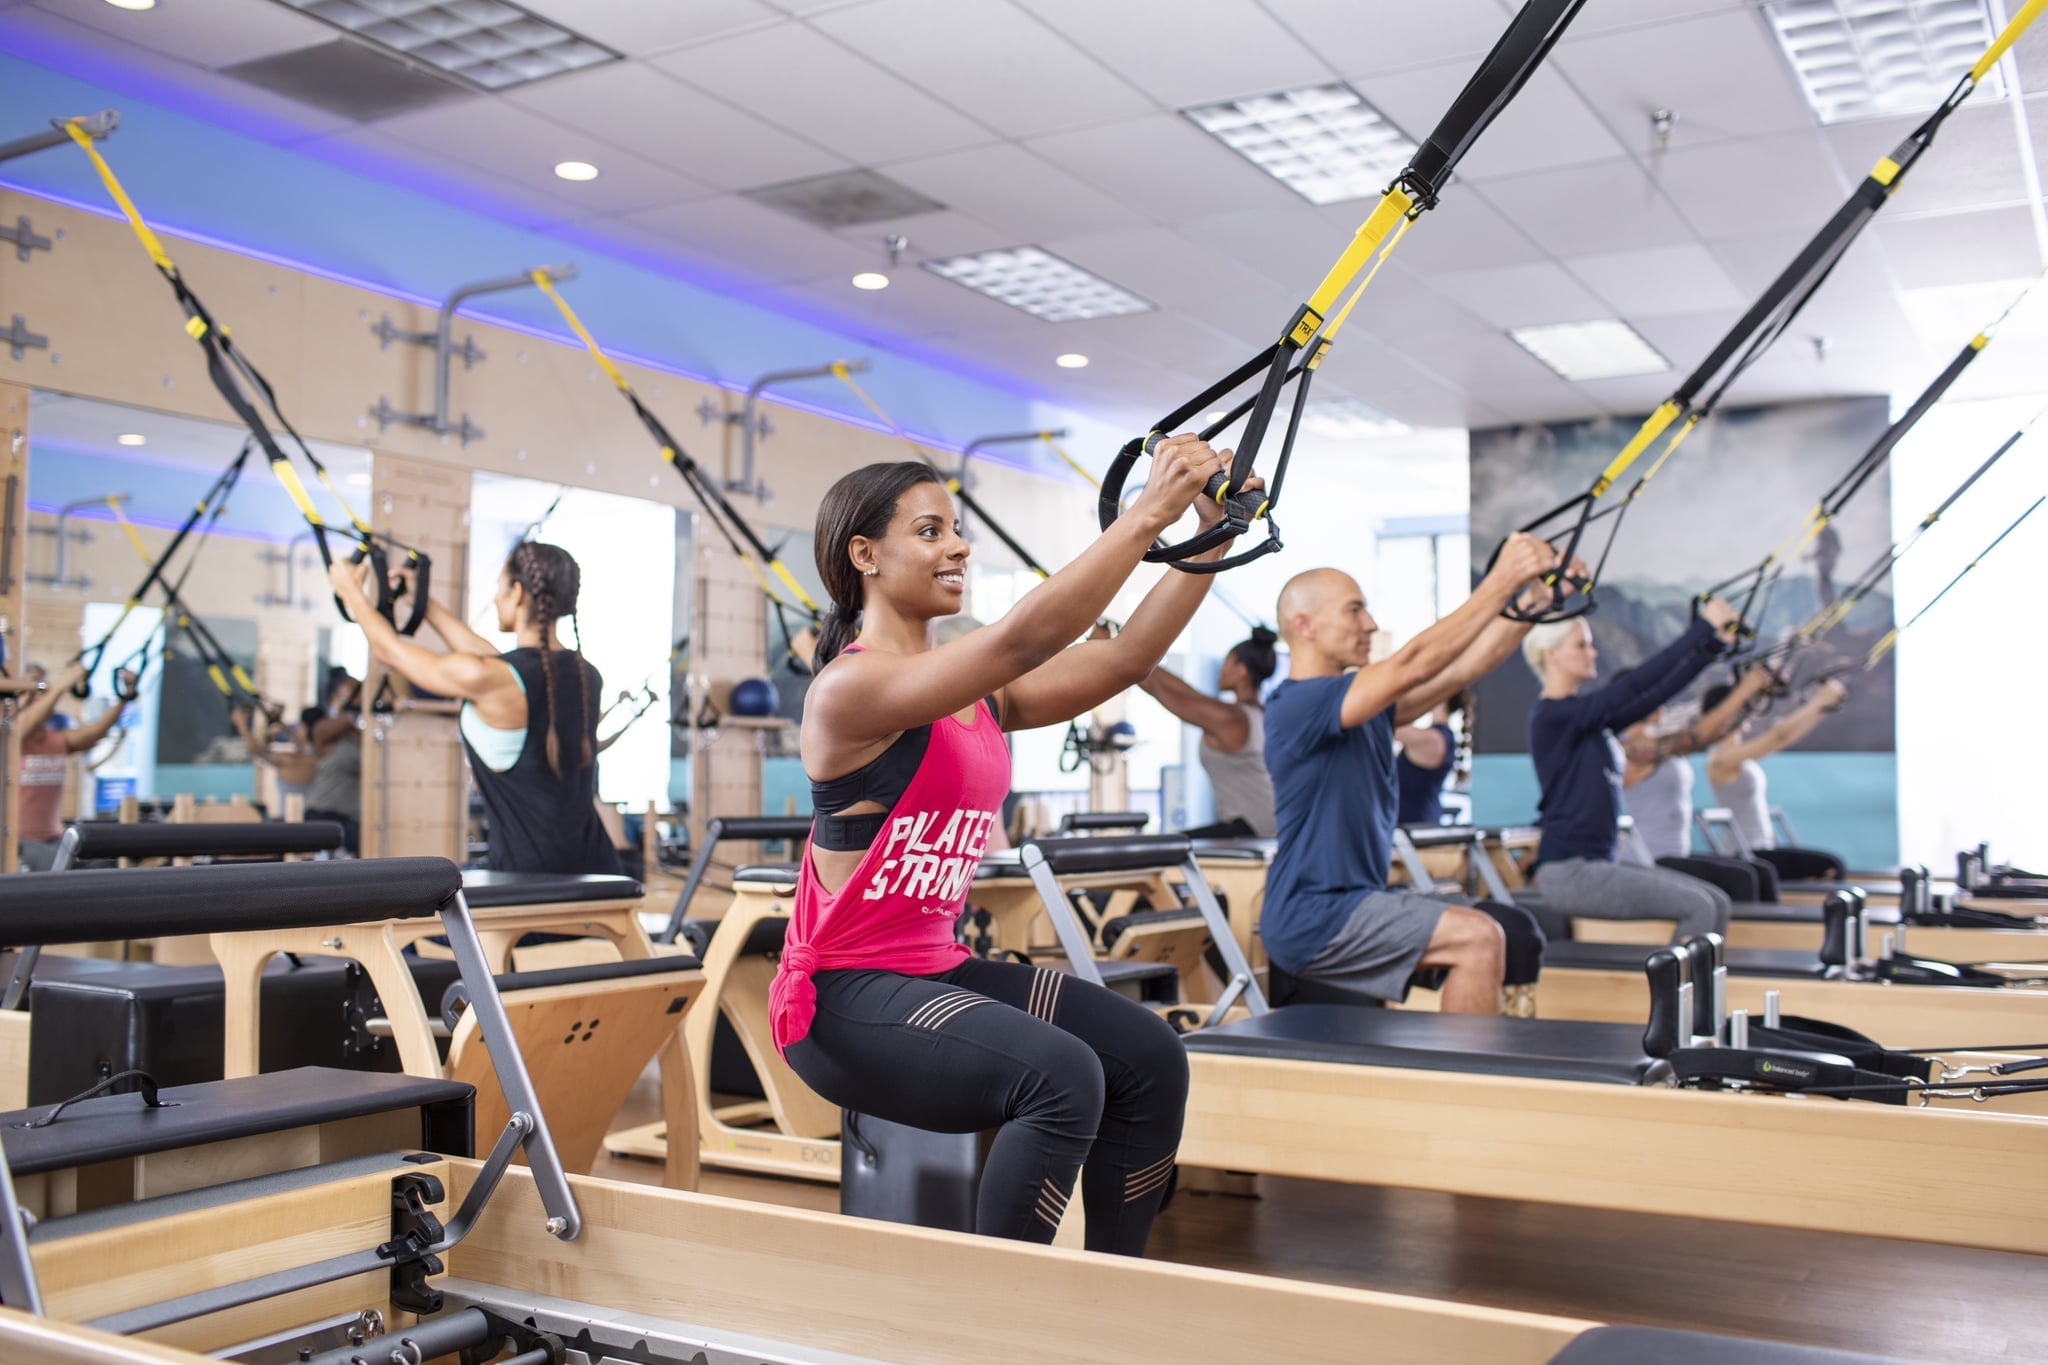 Tips For Your First Club Pilates Class